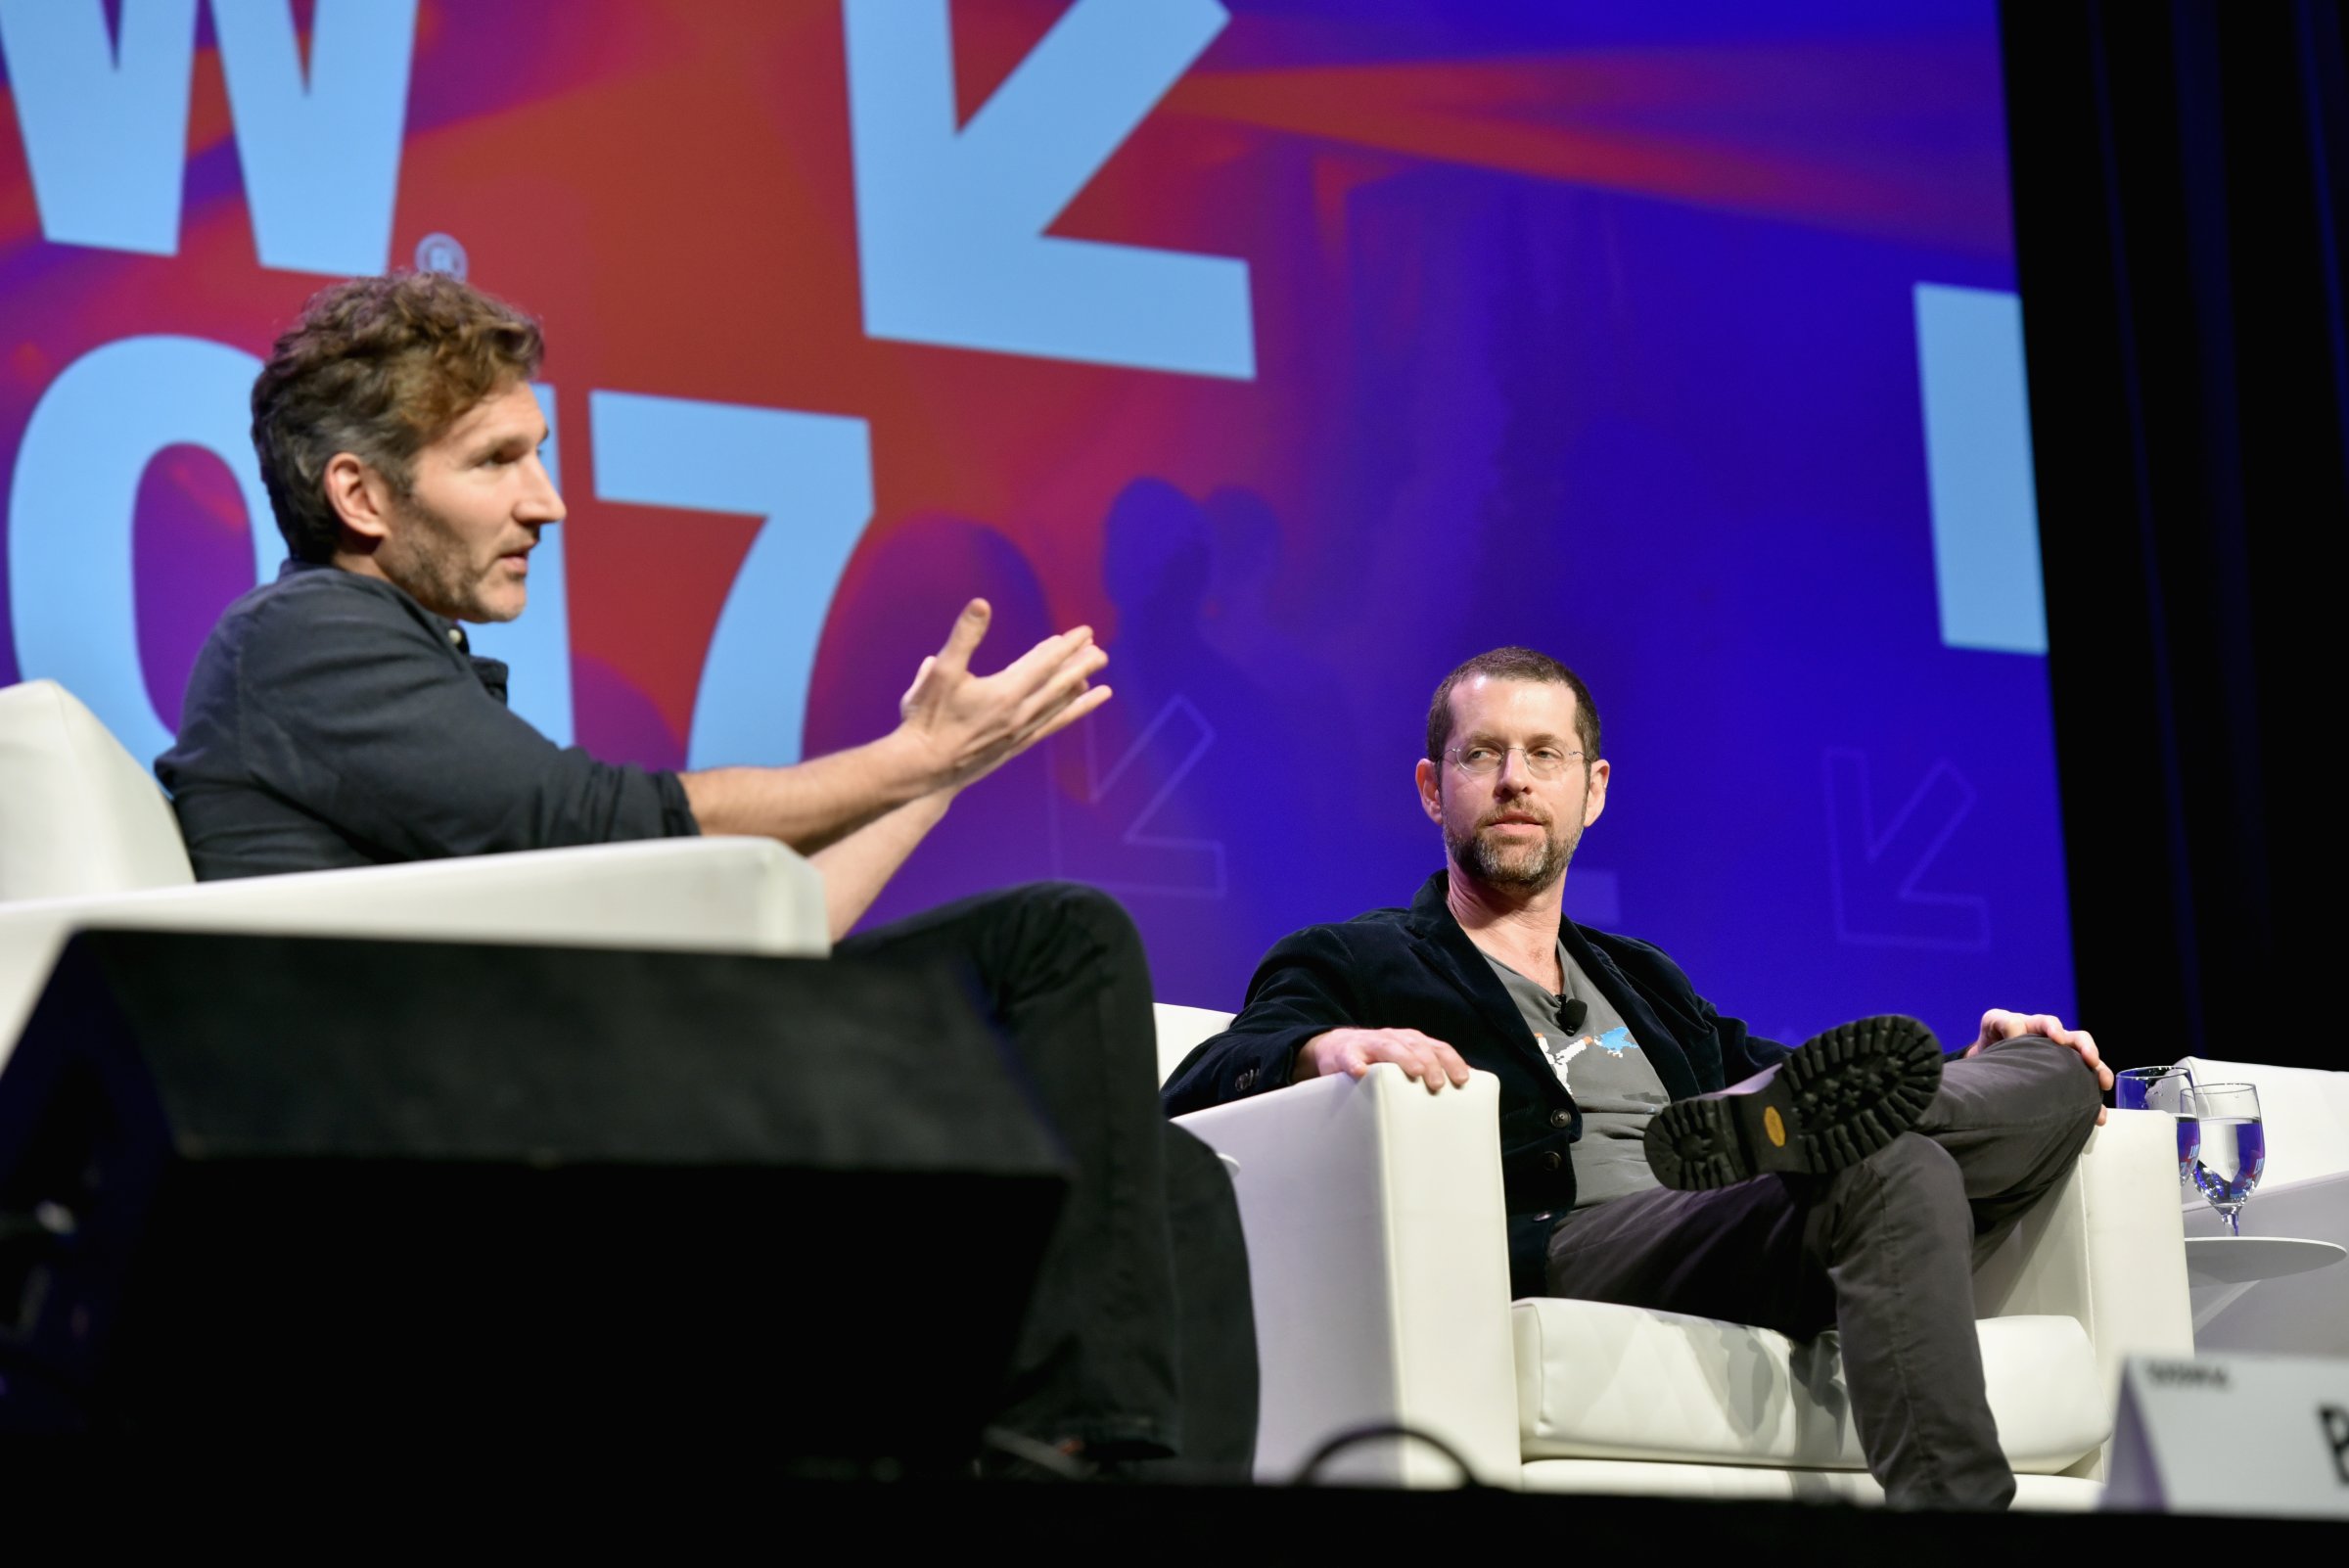 Writers David Benioff (L) and D.B. Weiss speak onstage at 'Featured Session: Game of Thrones' during 2017 SXSW Conference and Festivals at Austin Convention Center on March 12, 2017 in Austin.